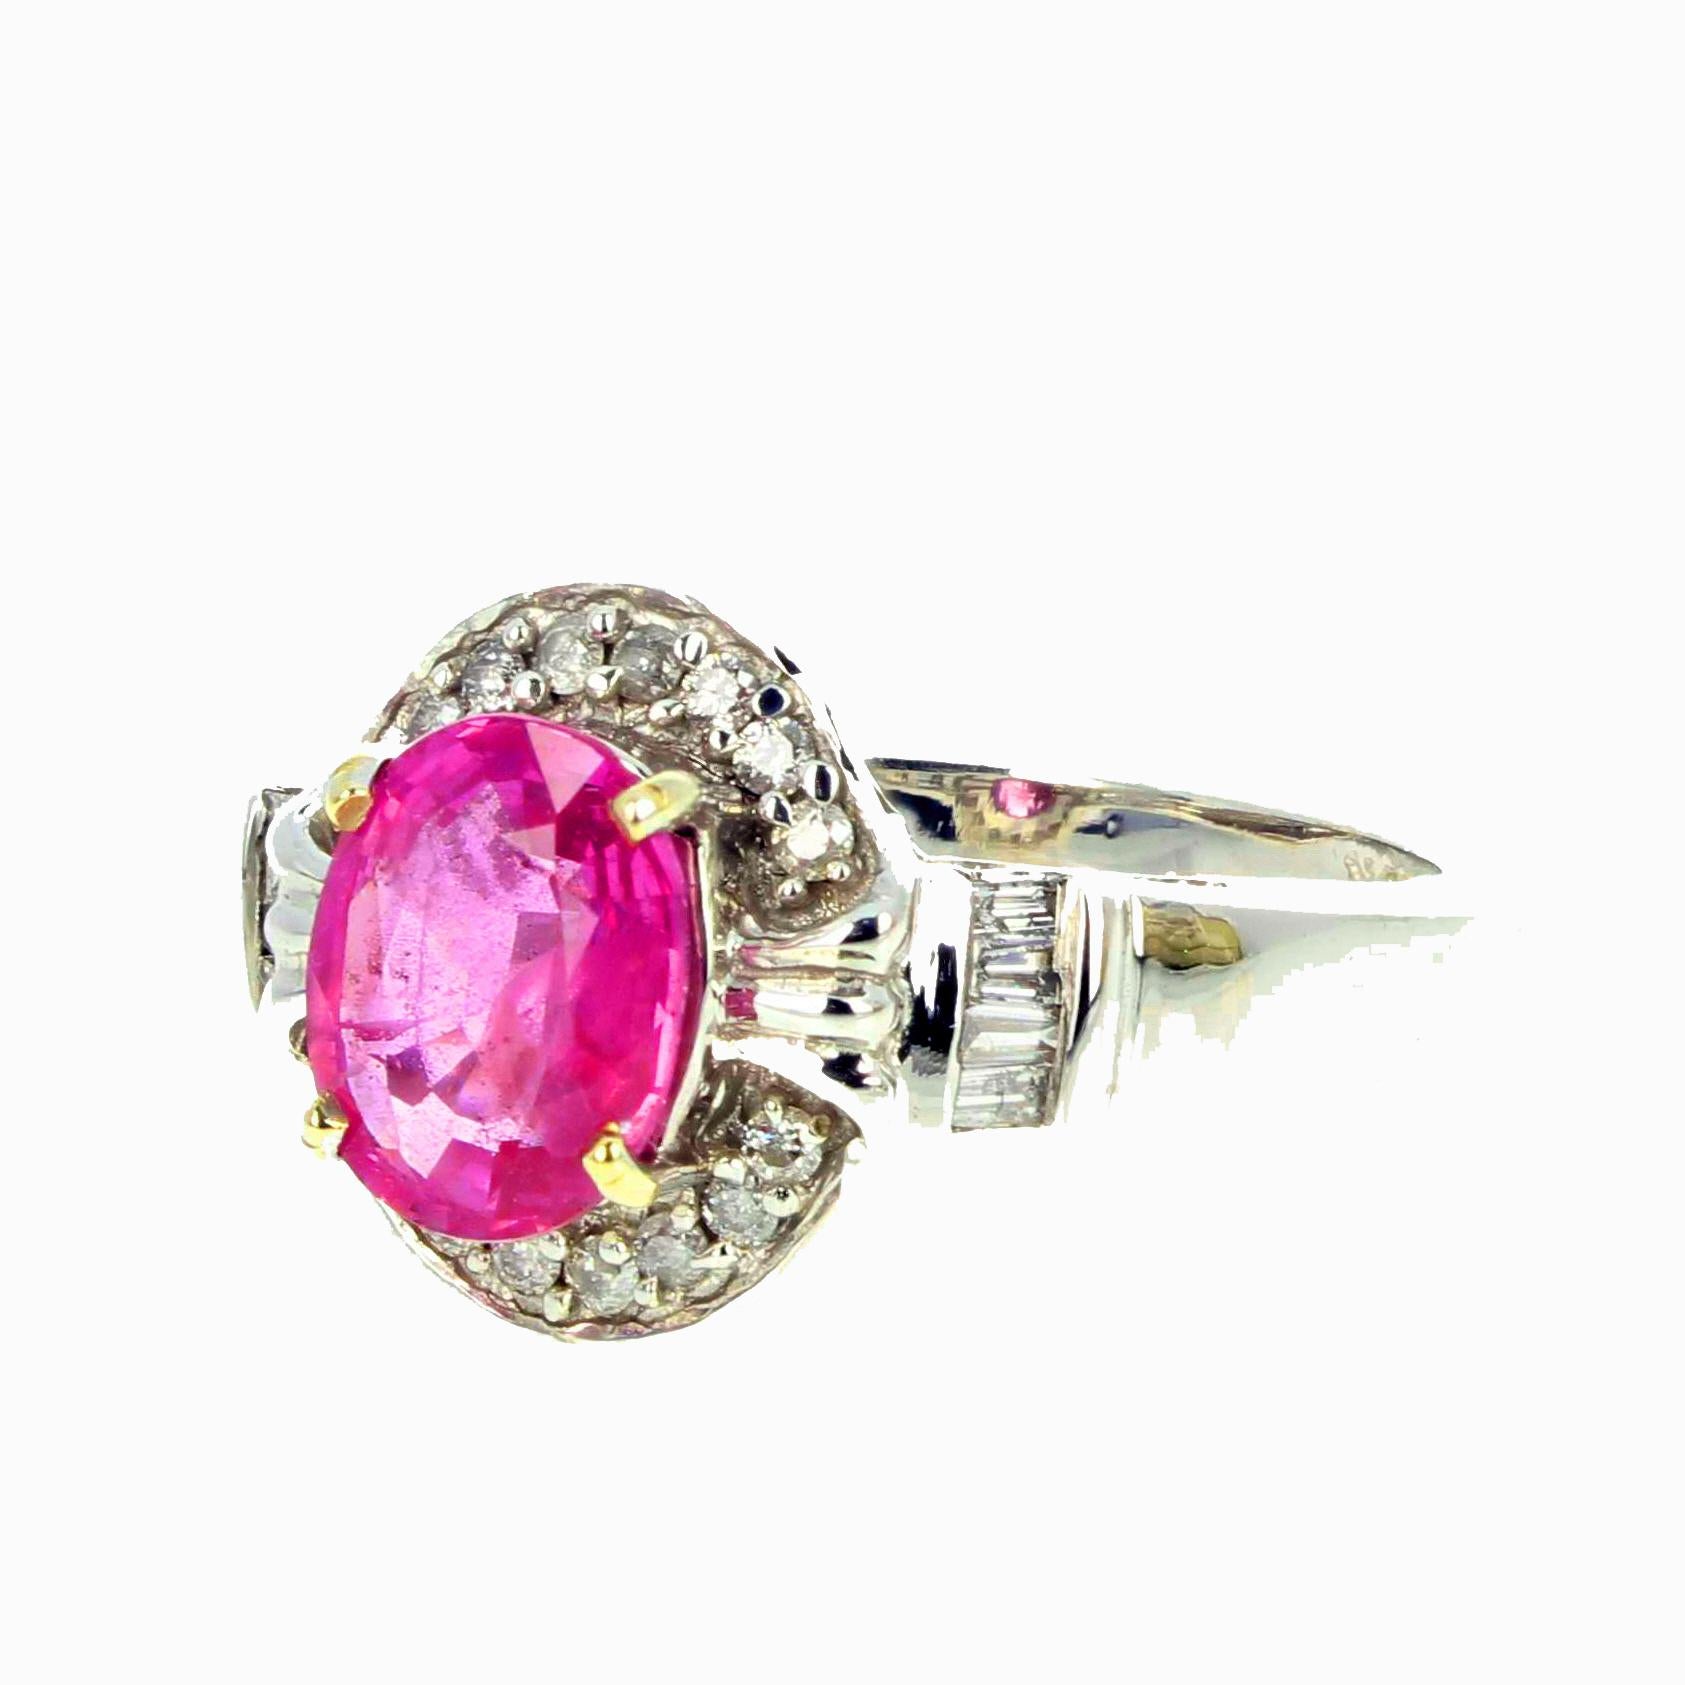 Mixed Cut AJD RARE Elegant Pinky Natural 1.17 Ct. Sapphire & Real Diamonds Gold Ring For Sale